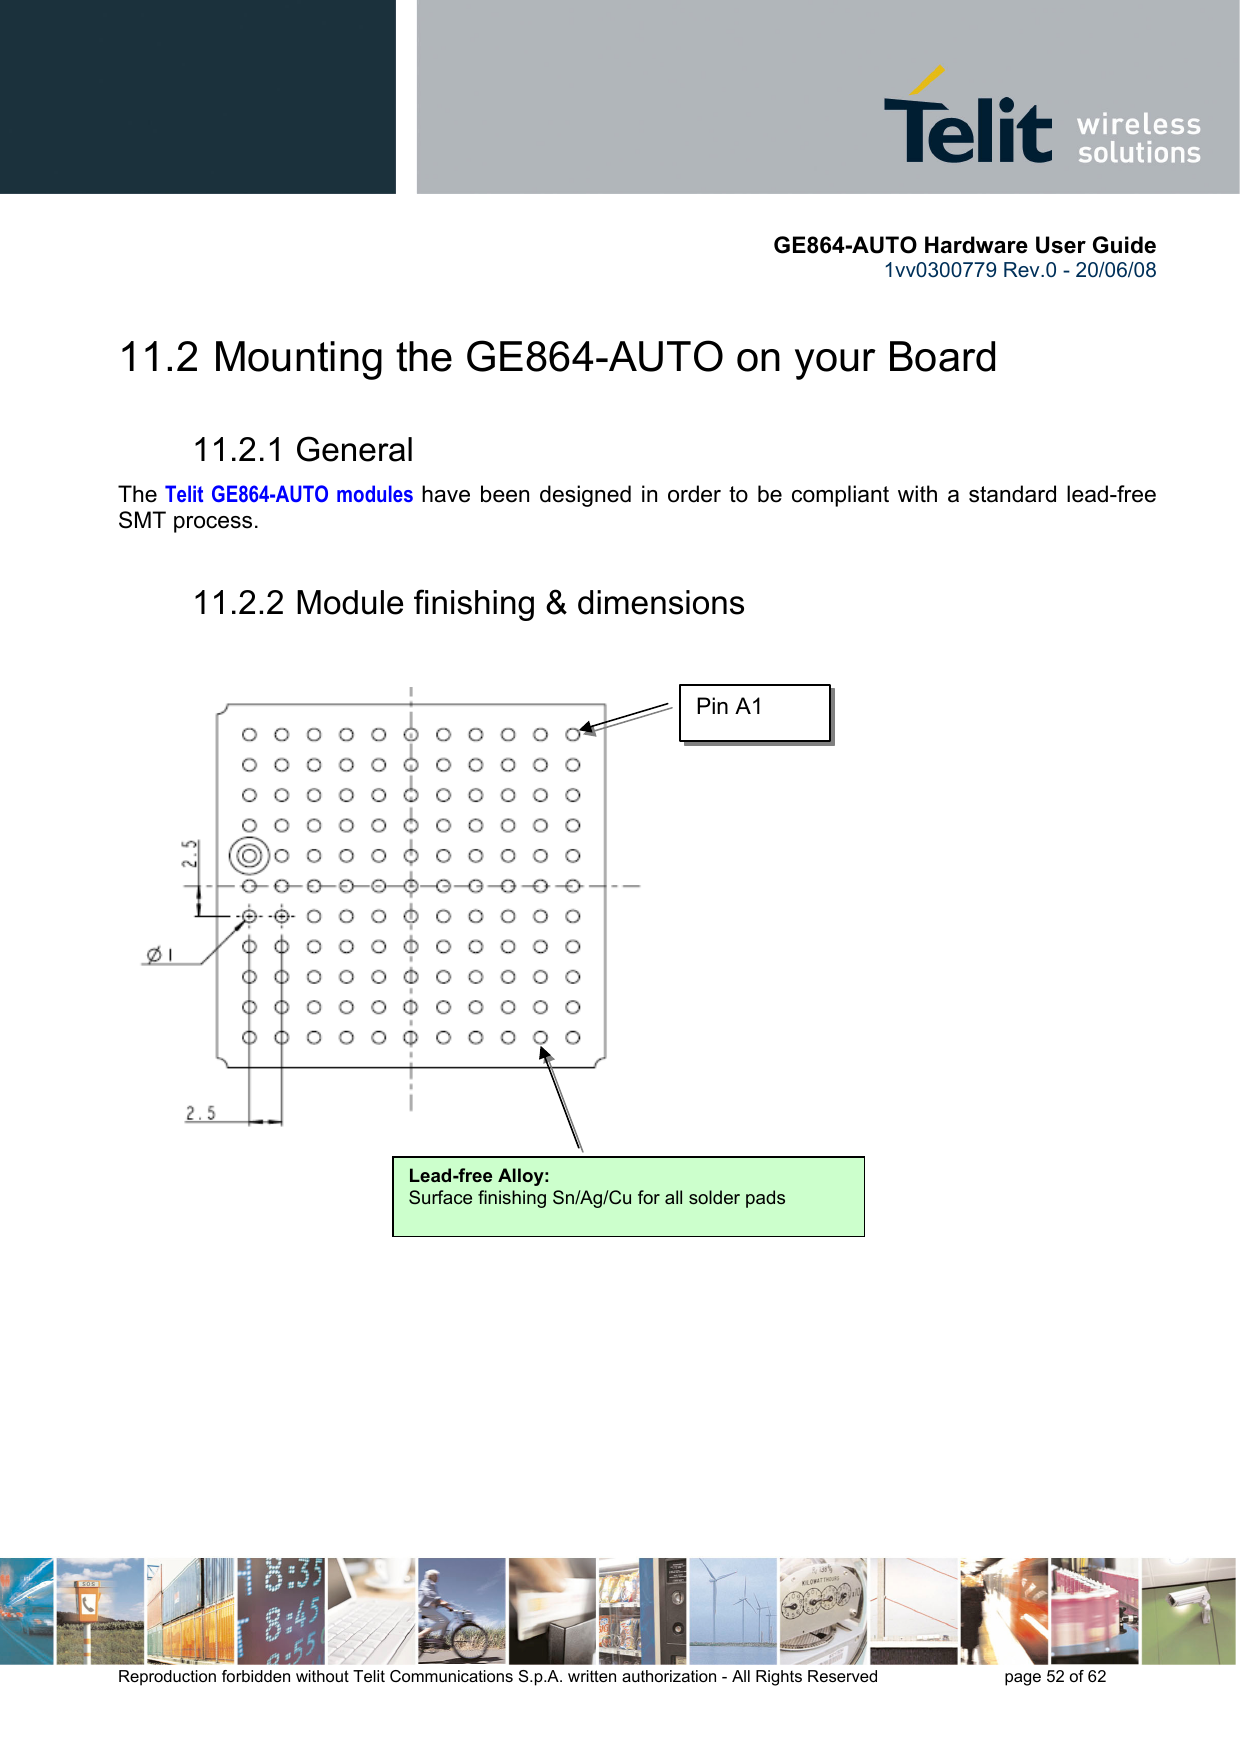       GE864-AUTO Hardware User Guide 1vv0300779 Rev.0 - 20/06/08      Reproduction forbidden without Telit Communications S.p.A. written authorization - All Rights Reserved    page 52 of 62  11.2  Mounting the GE864-AUTO on your Board 11.2.1 General The Telit GE864-AUTO modules have been designed in order to be compliant with a standard lead-free SMT process. 11.2.2 Module finishing &amp; dimensions                   Lead-free Alloy:Surface finishing Sn/Ag/Cu for all solder pads Pin A1 